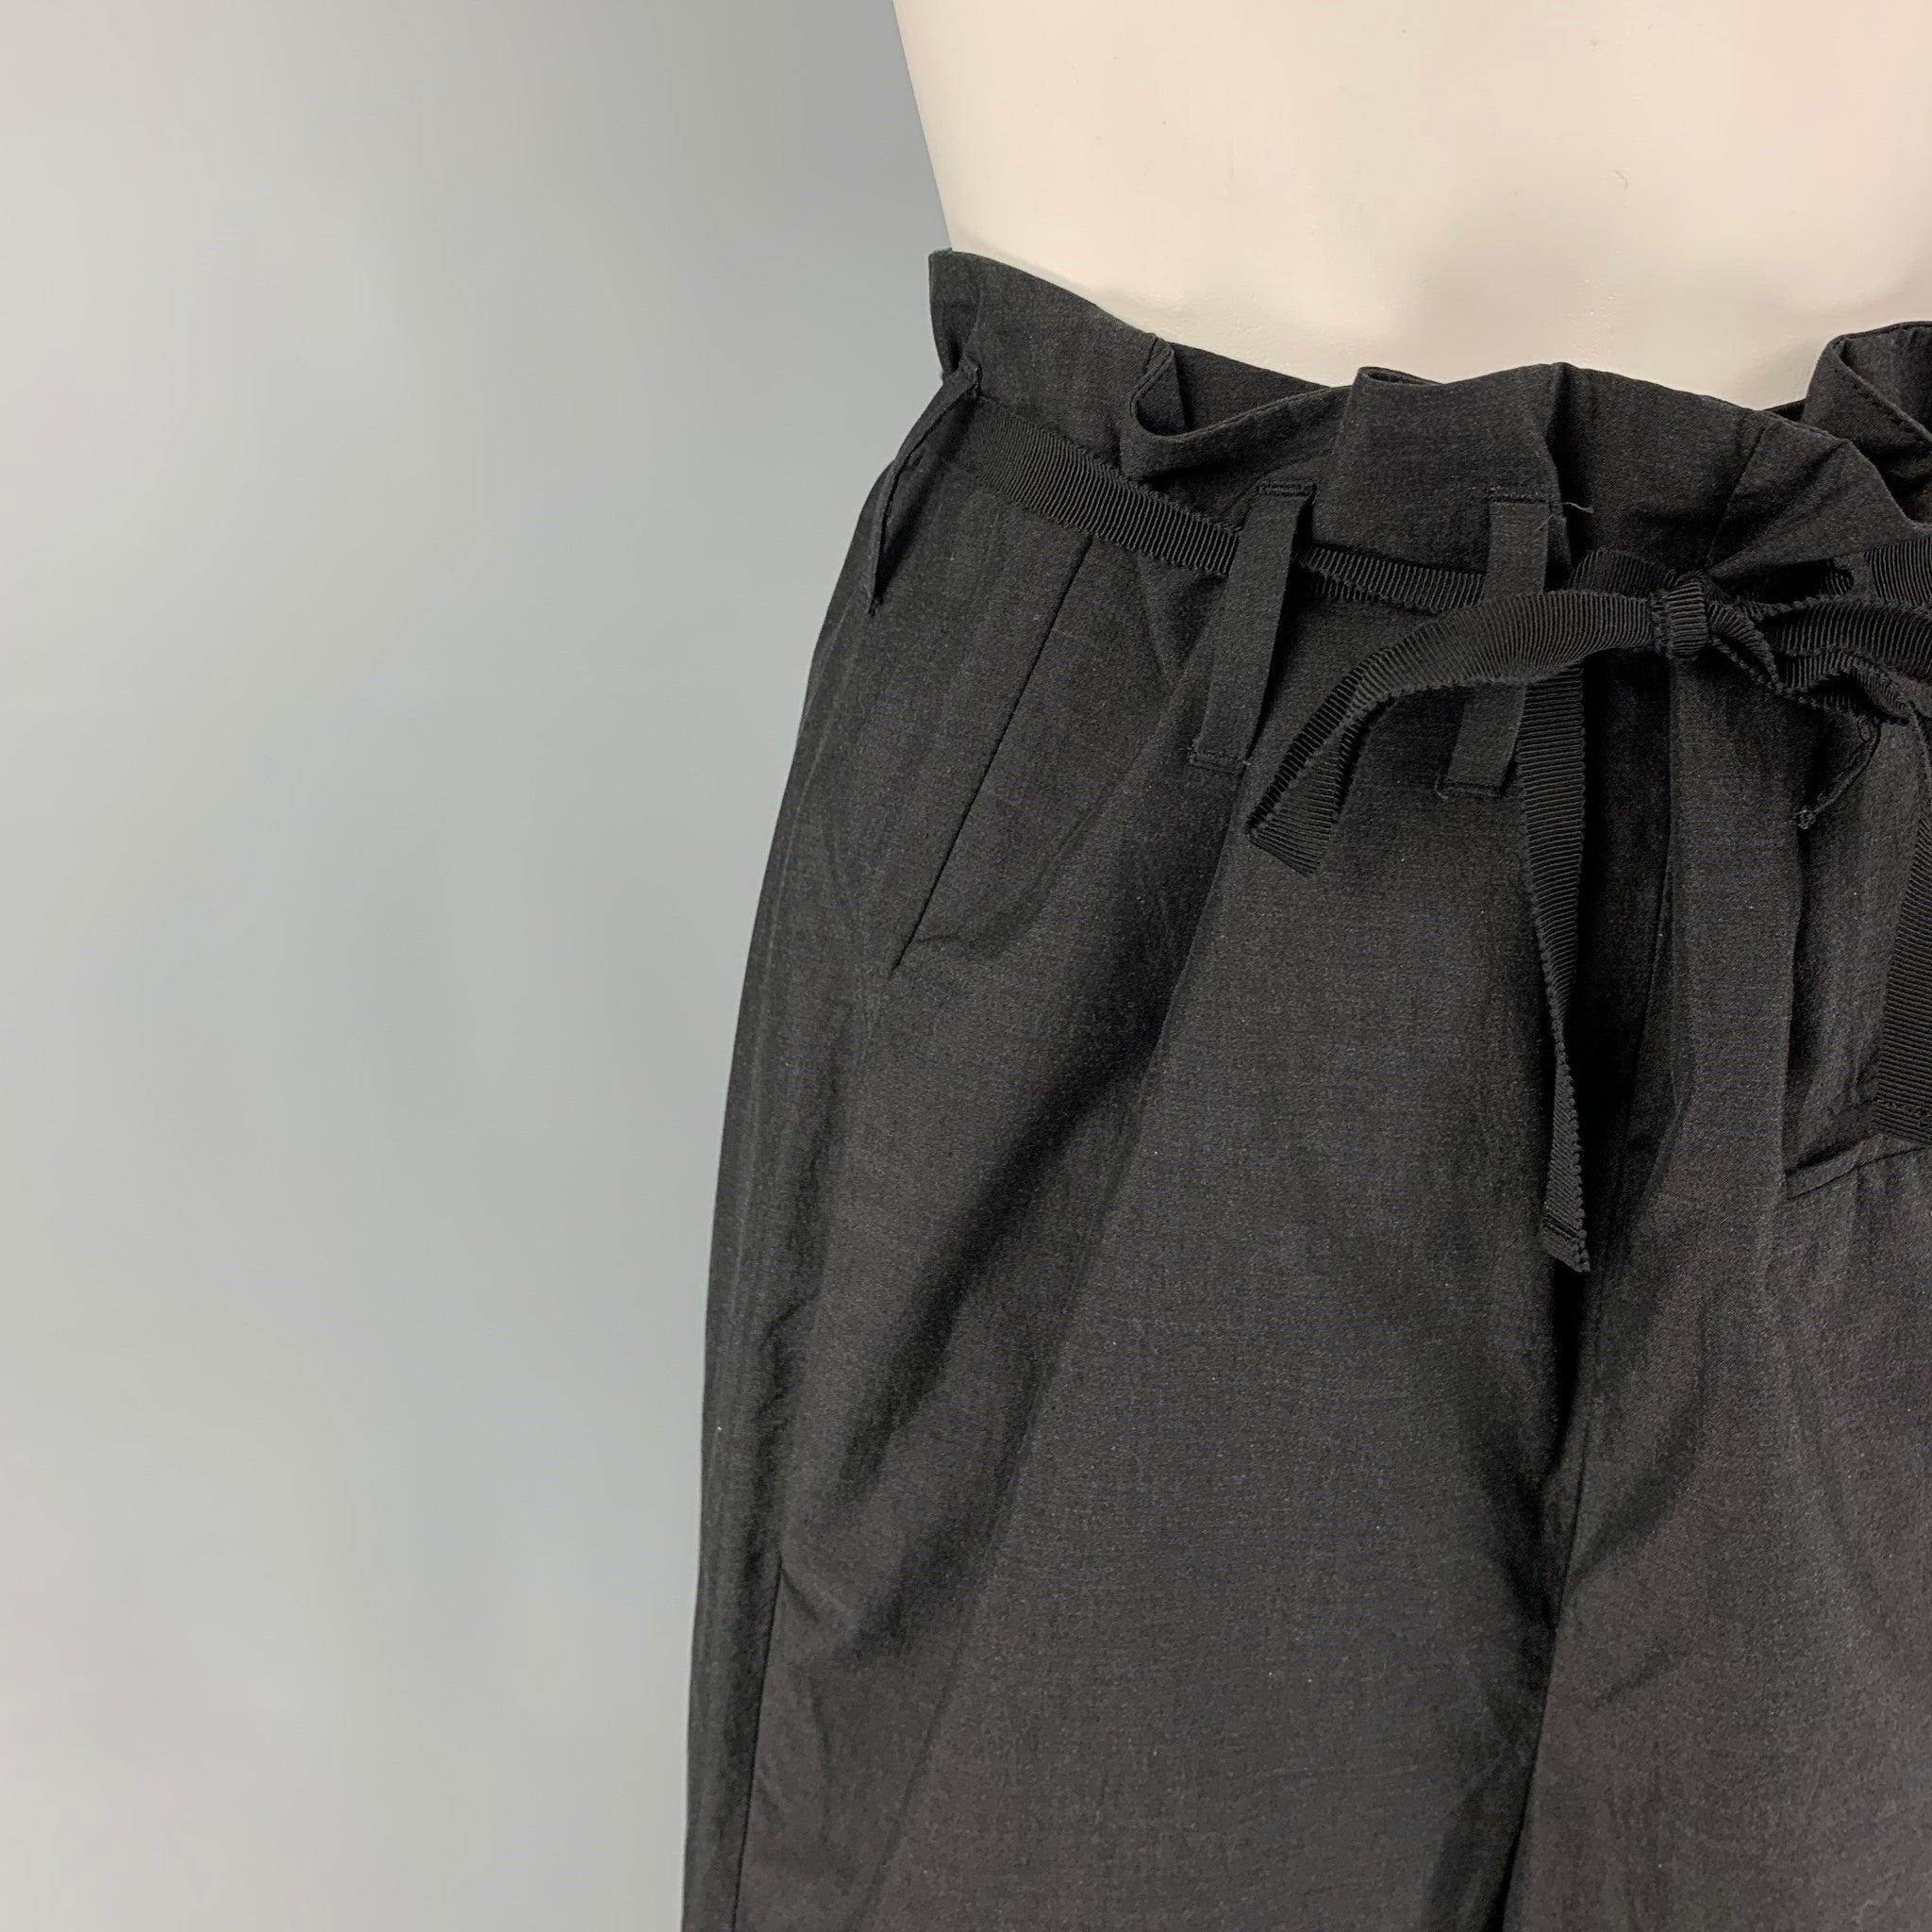 MARNI dress pants comes in a black cotton featuring a high waisted style, ruffled waist detail, ribbon belt detail, and a button fly closure. Made in Italy.
Excellent
Pre-Owned Condition. 

Marked:   40 

Measurements: 
  Waist: 30 inches Rise: 15